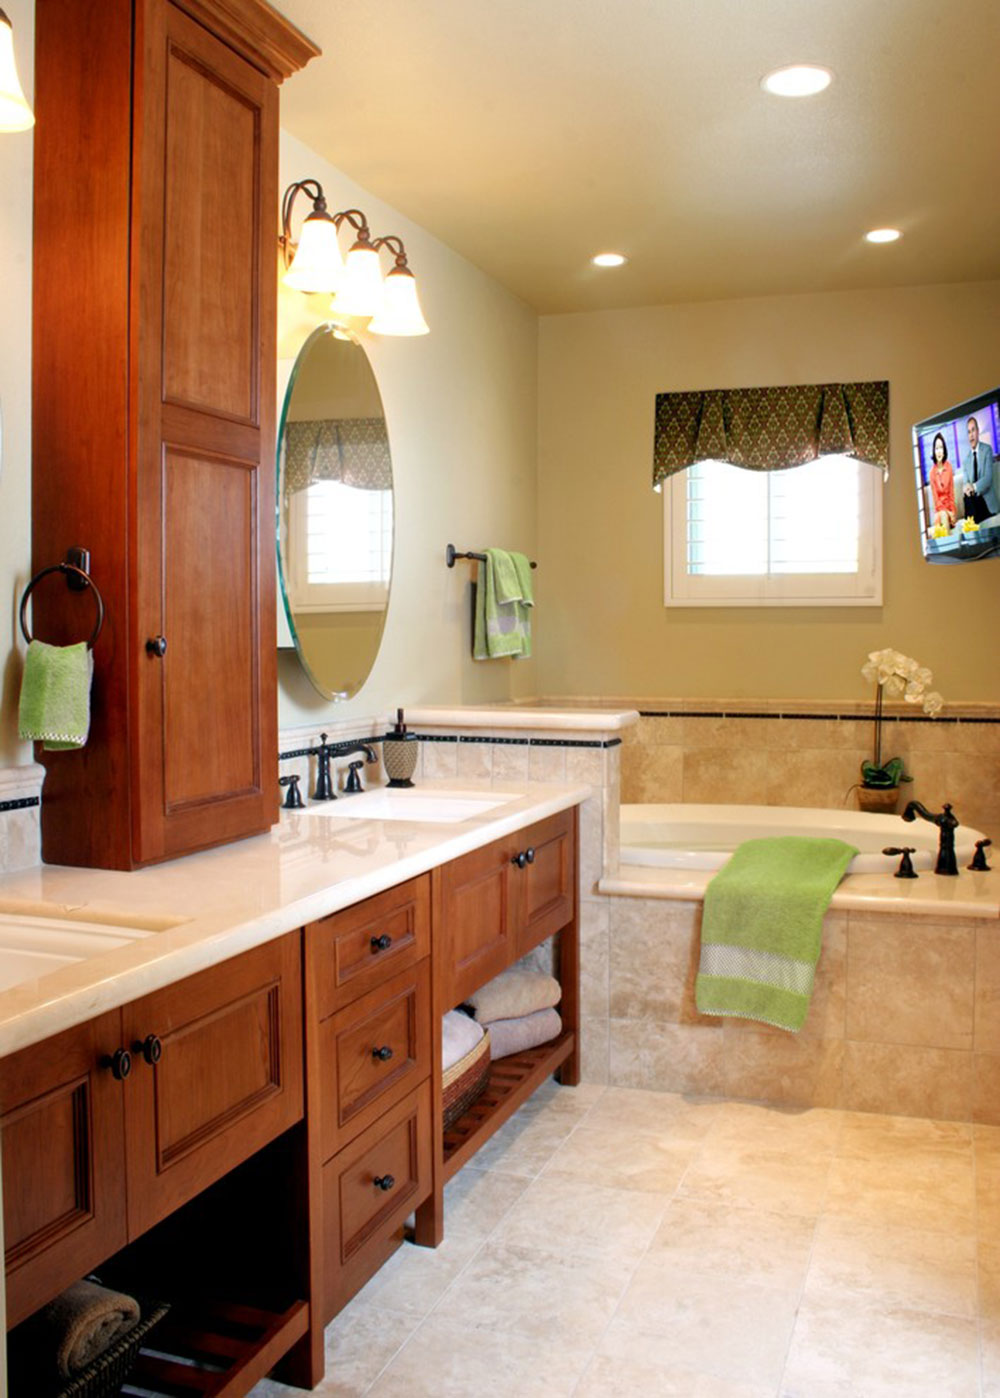 Refreshing-Renovation-Huntington-Beach-CA-by-Morey-Remodeling-Group Small bathroom remodel tips to do it properly